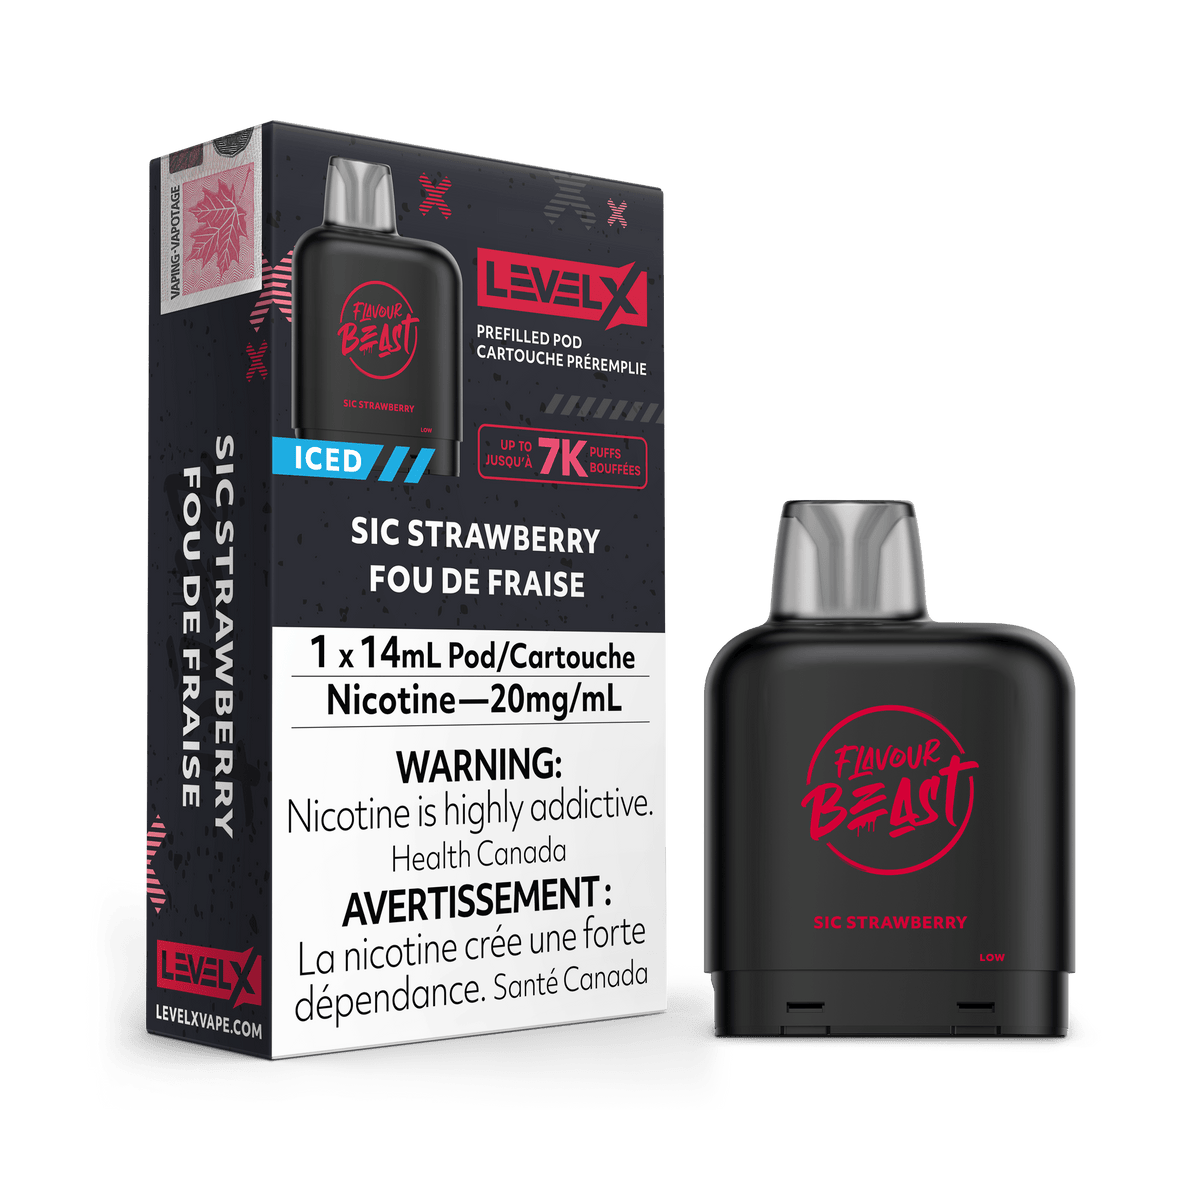 Flavour Beast Level X Pod - Sic Strawberry Iced available on Canada online vape shop